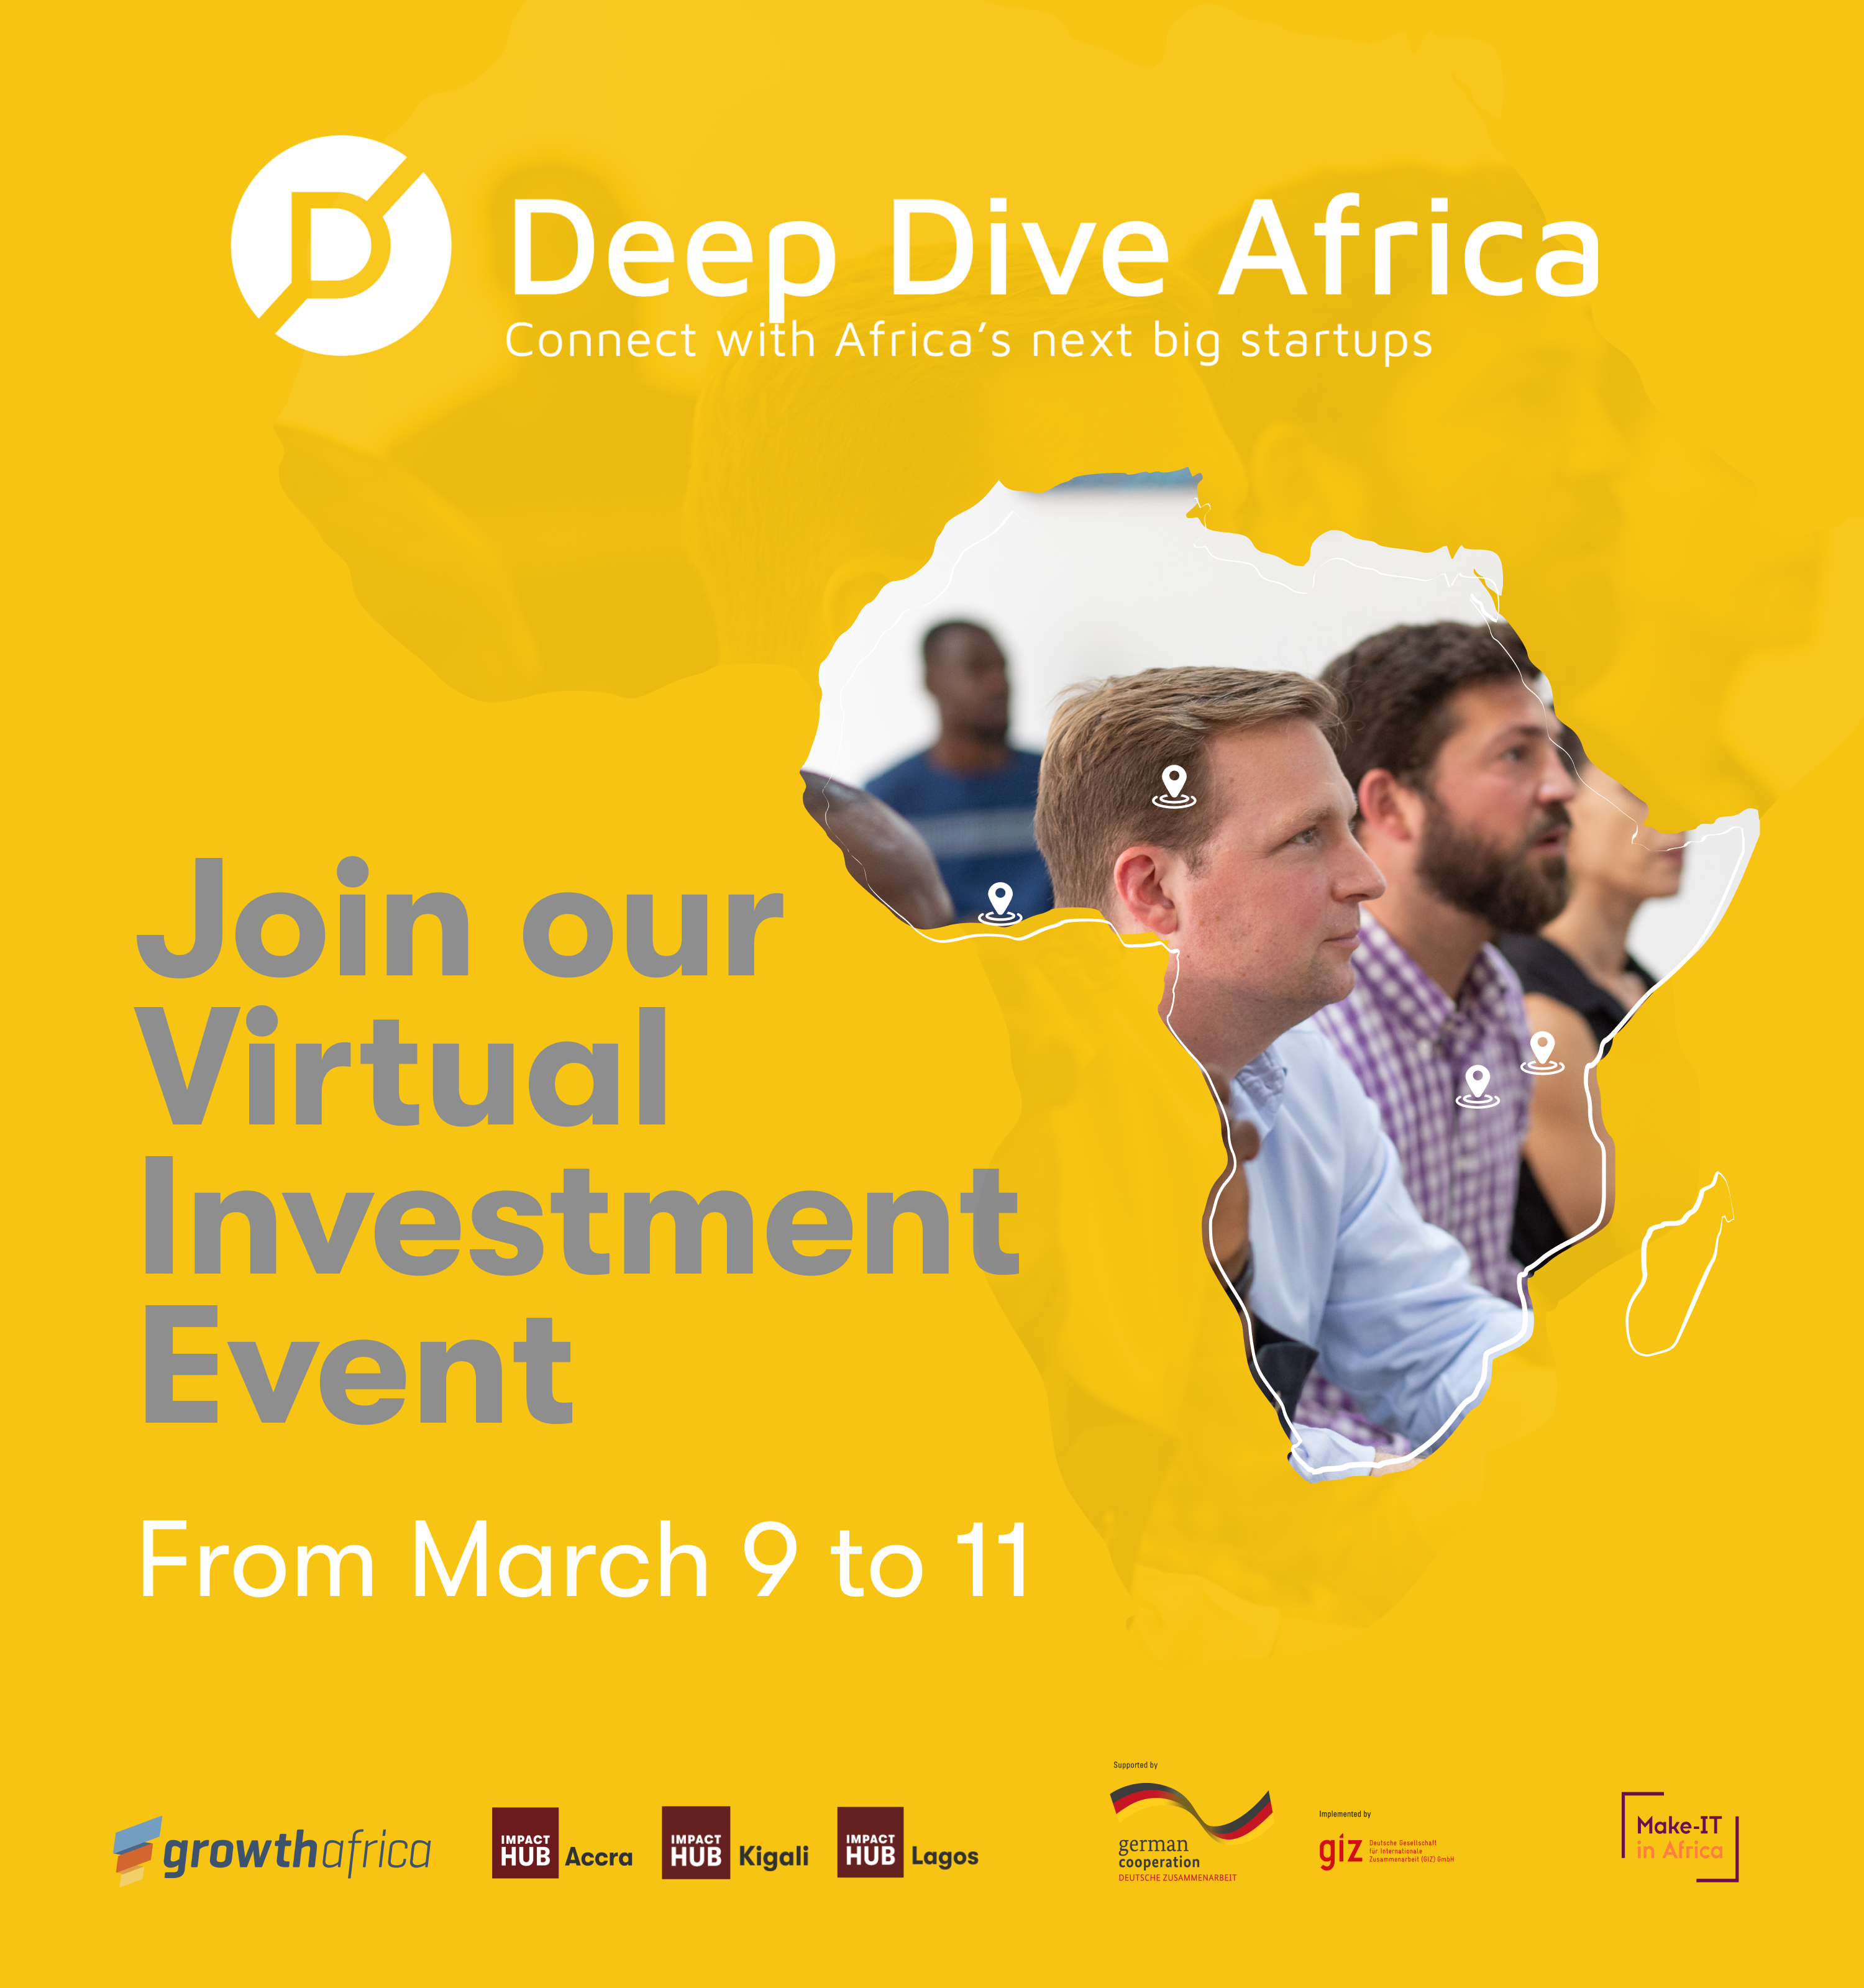 deep dive africa investment event